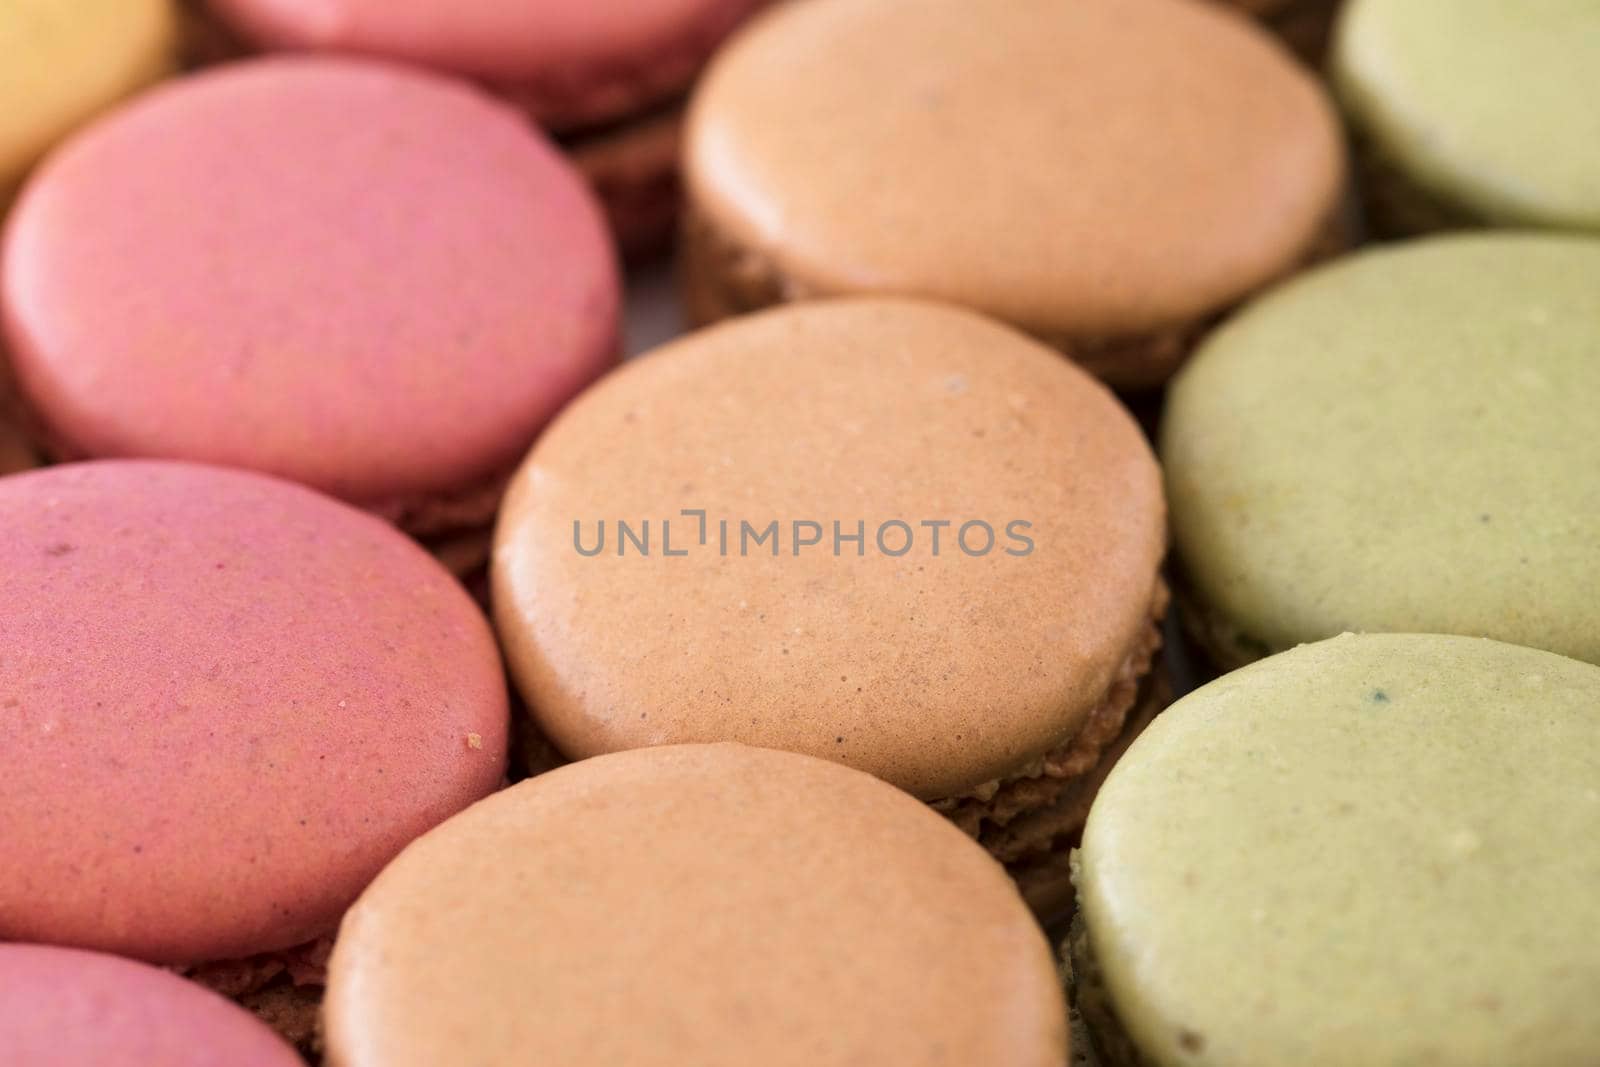 Macaroons in a variety of colors and flavors